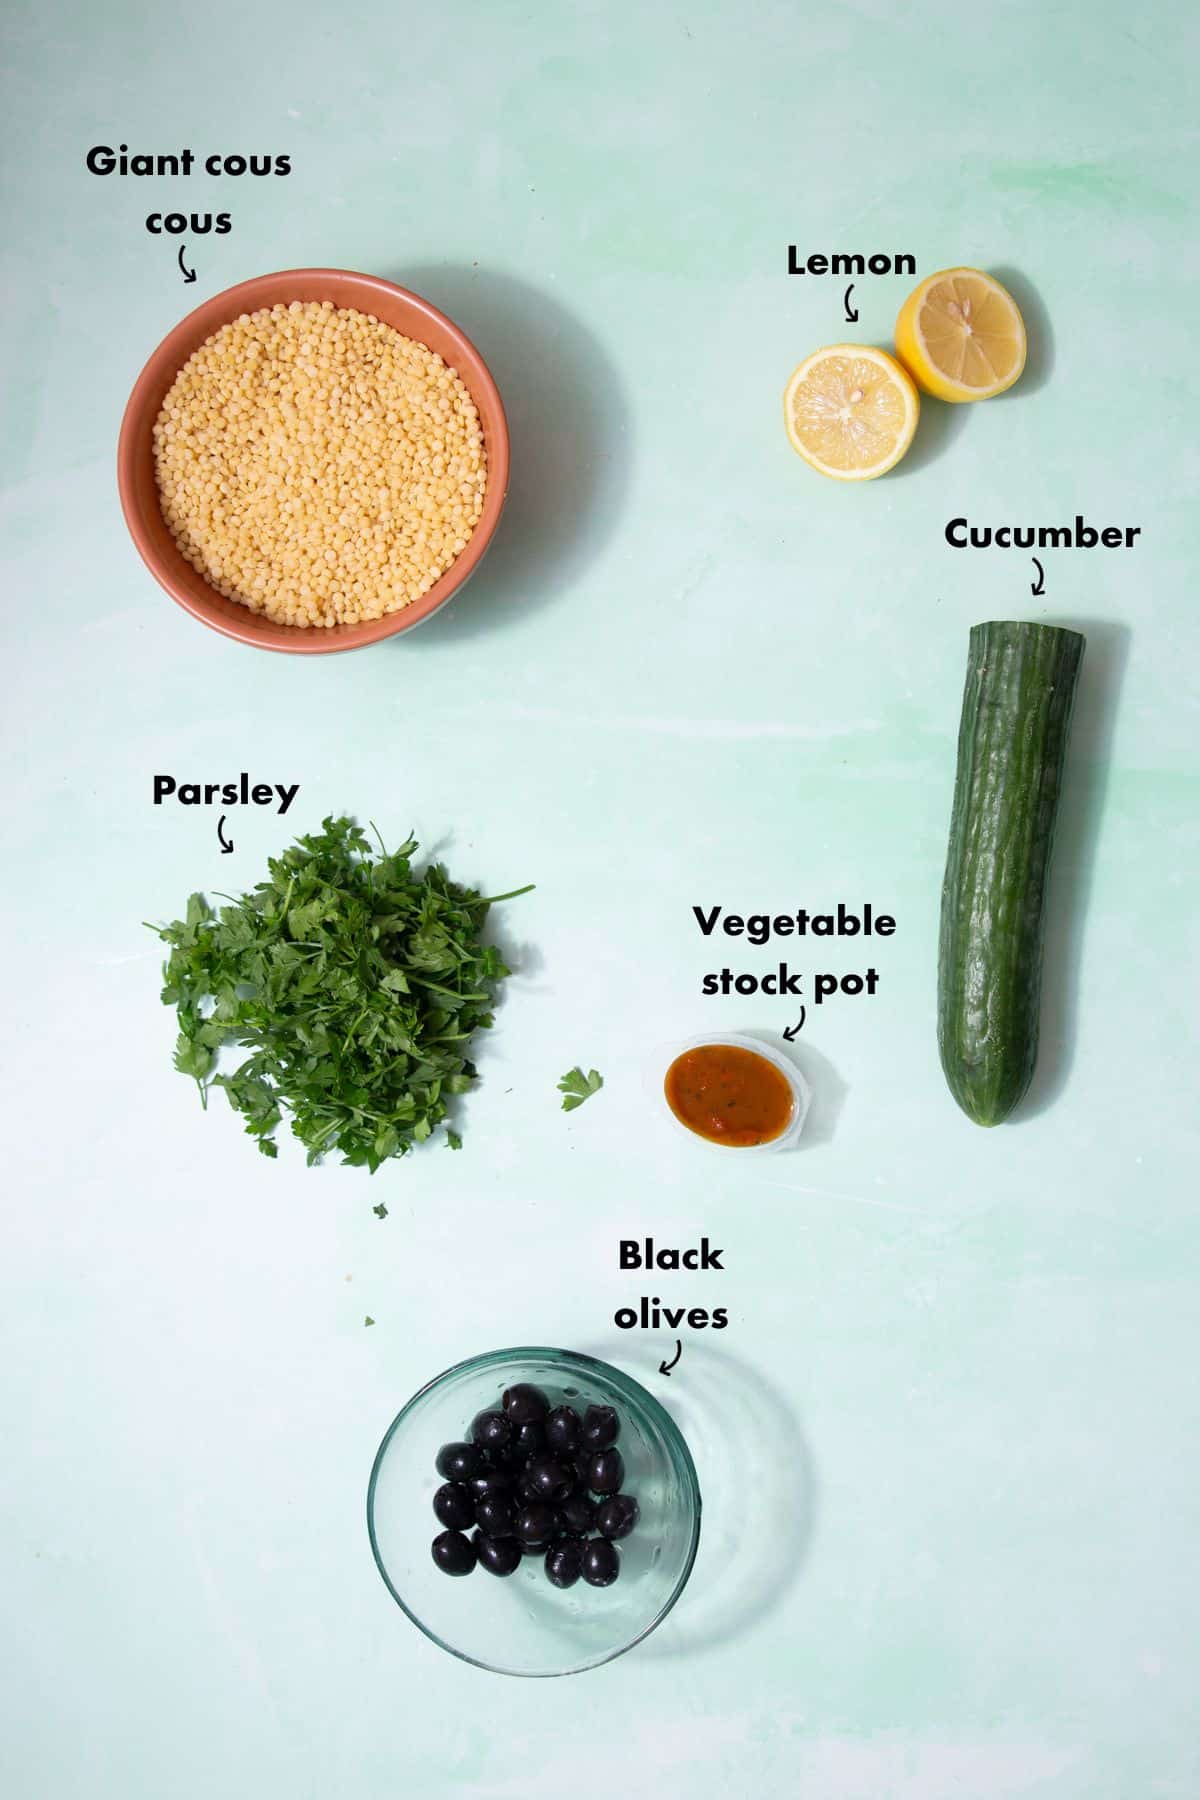 Ingredients to make the giant cous cous recipe laid out on a pale blue back ground and labelled.